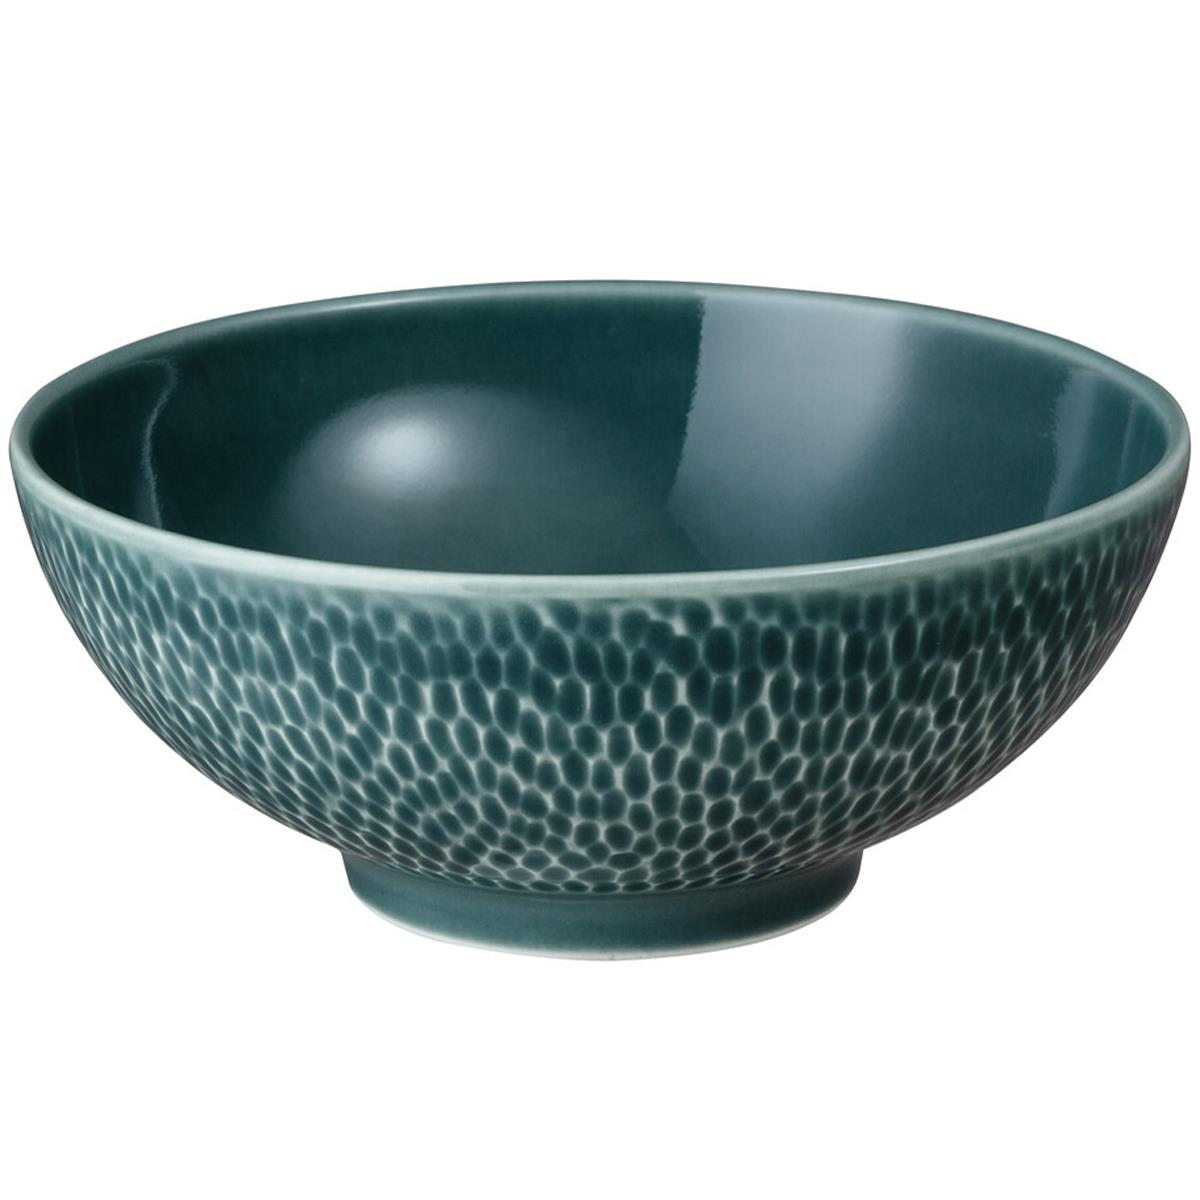 Denby Porcelain Carve Green Cereal Bowl Questions & Answers